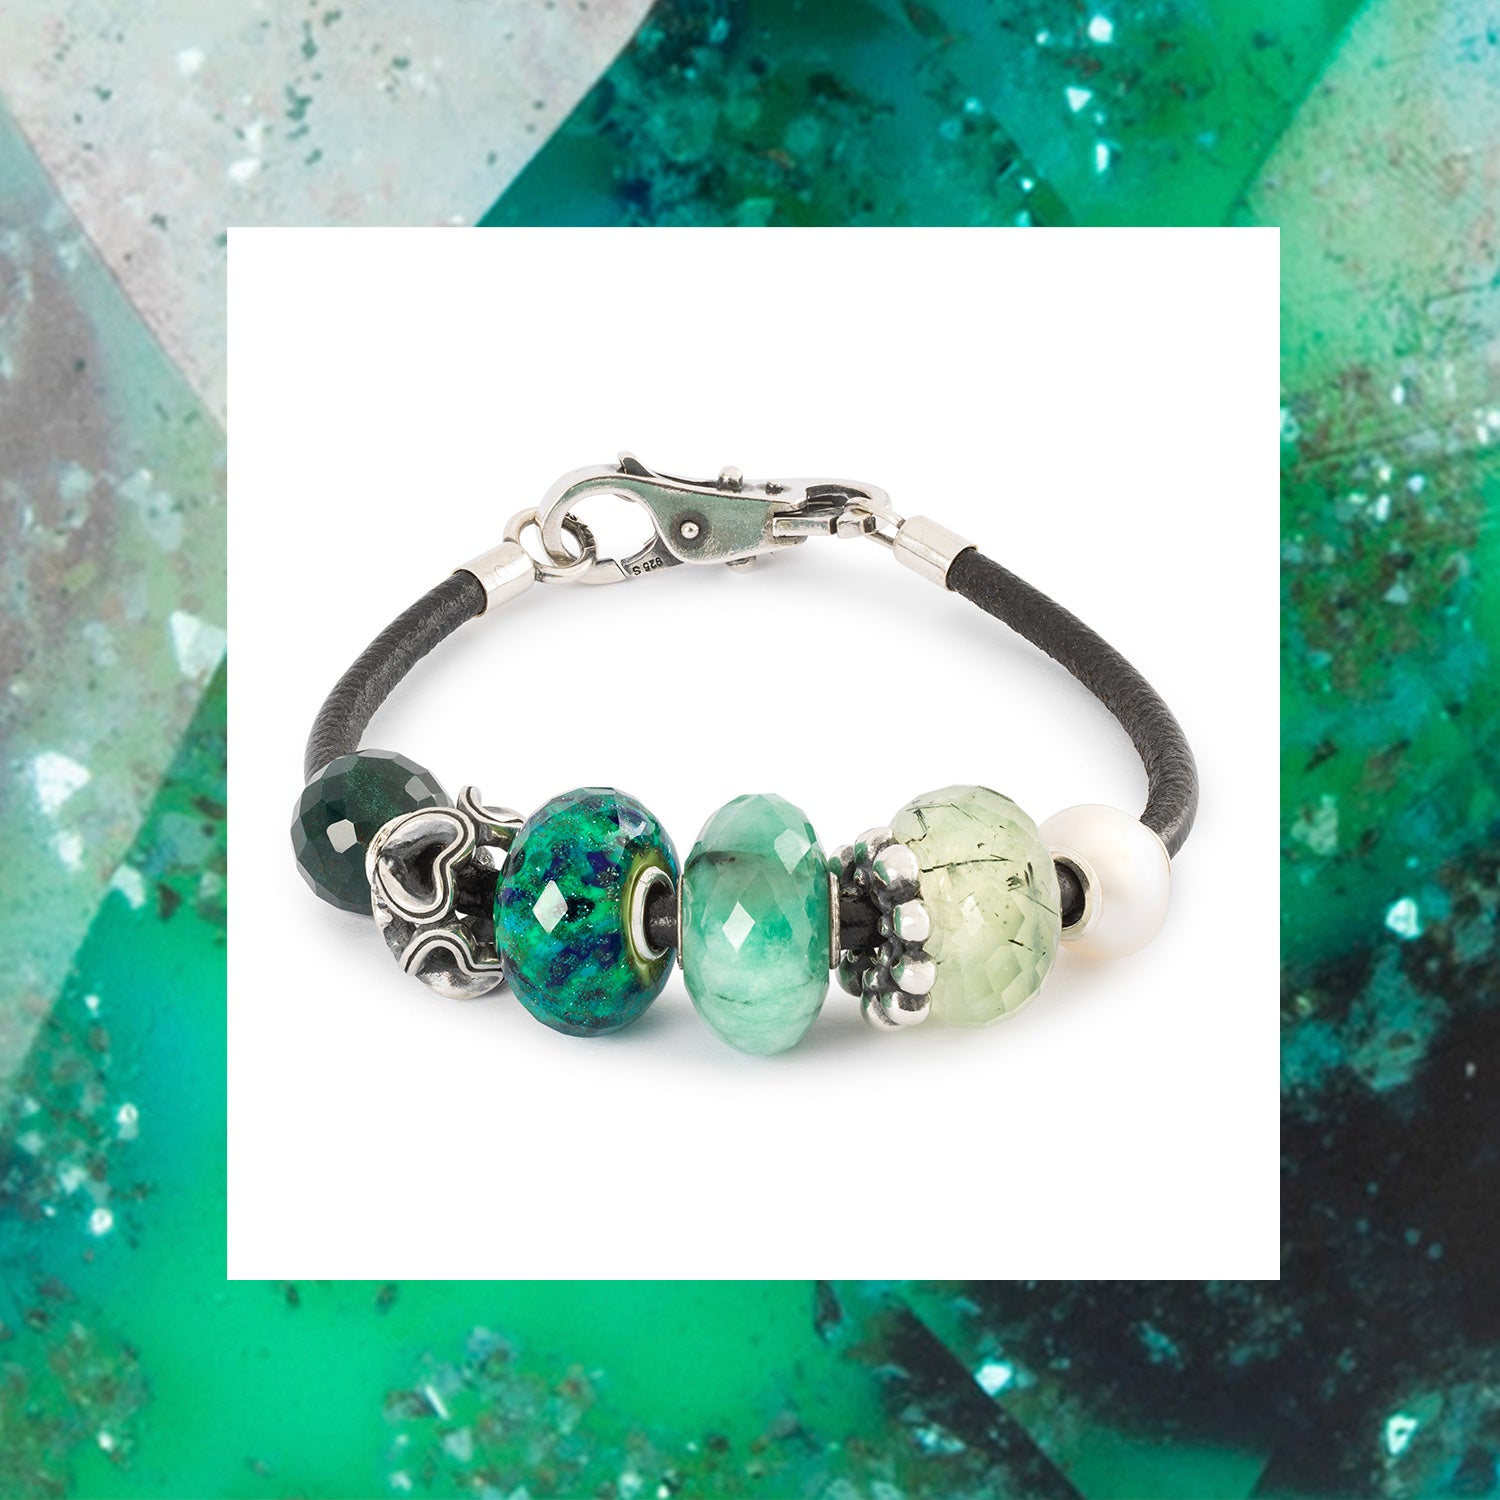 Trollbeads leather bracelet with green hues in gemstone, glass and silver beads 